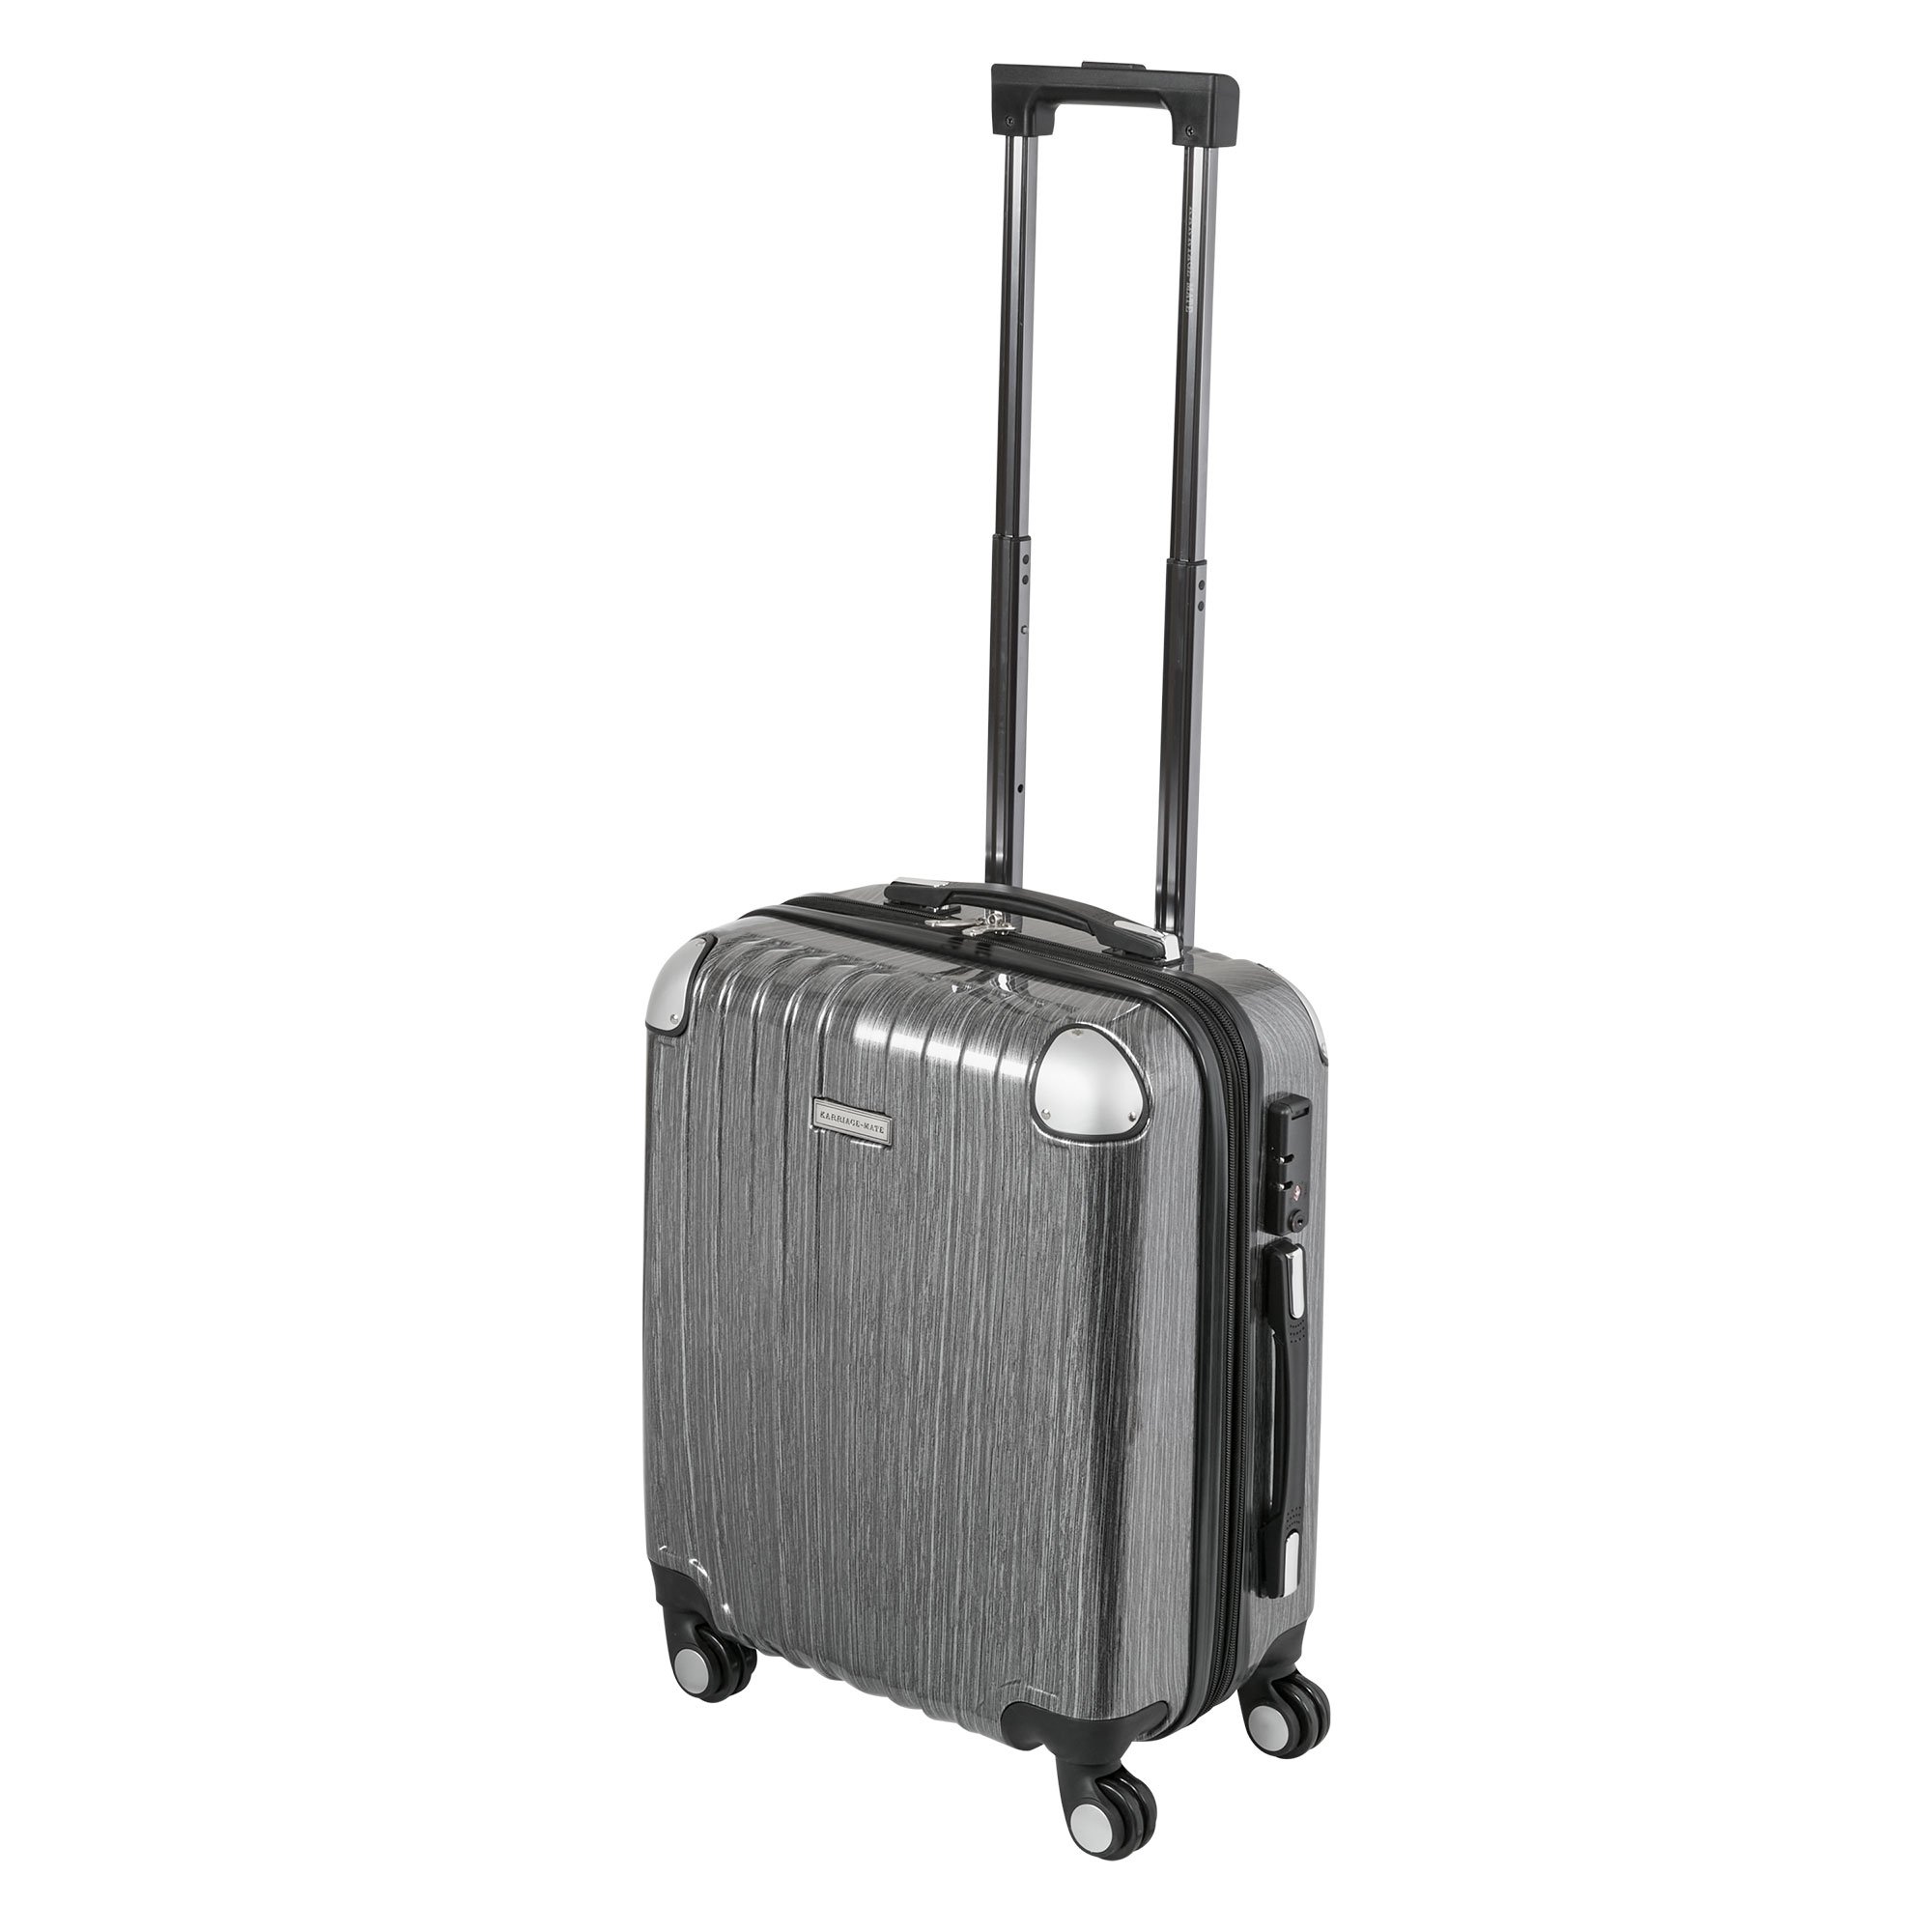 Hardside Carry-On Suitcase with Spin Wheels